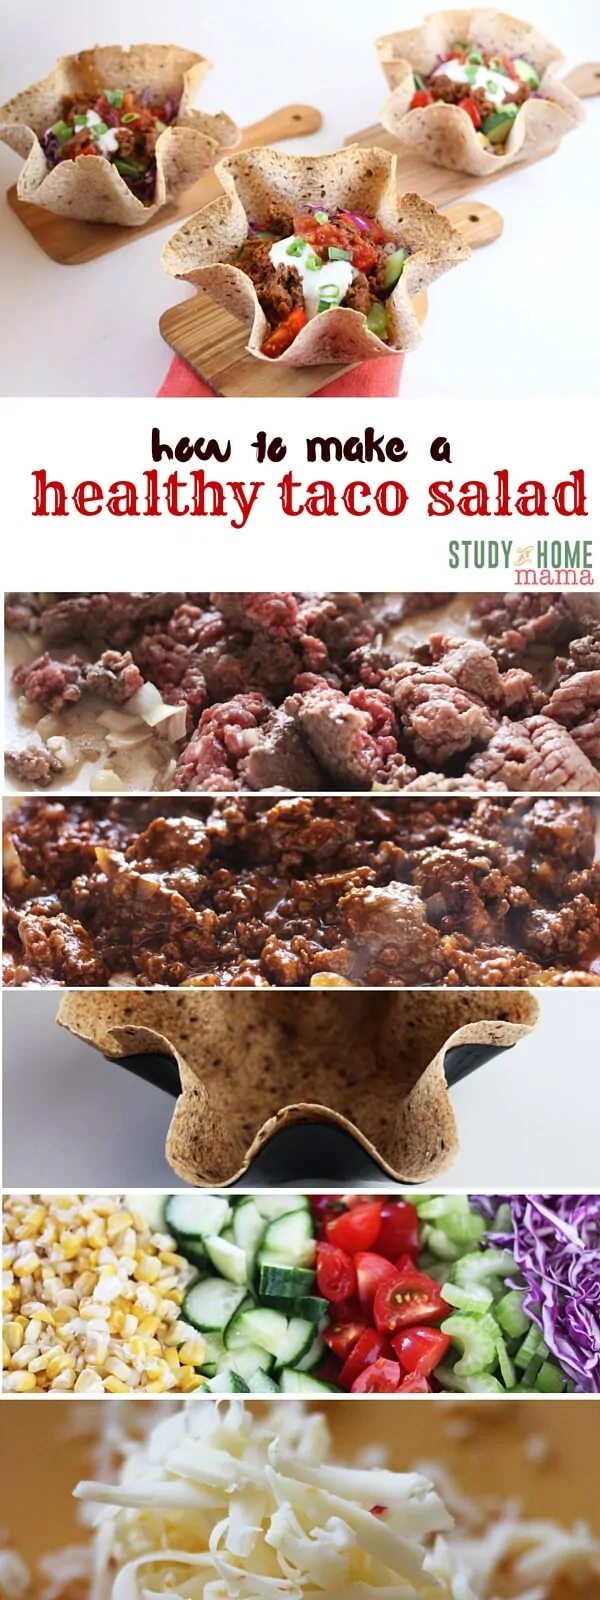 How to Make a Healthy Taco Salad - tips like how to season beef perfectly without salt, and healthy swaps like making your own crunchy taco bowl in less than 10 minutes. This healthy taco salad is a healthy meal idea that you can feel great about feeding to your family